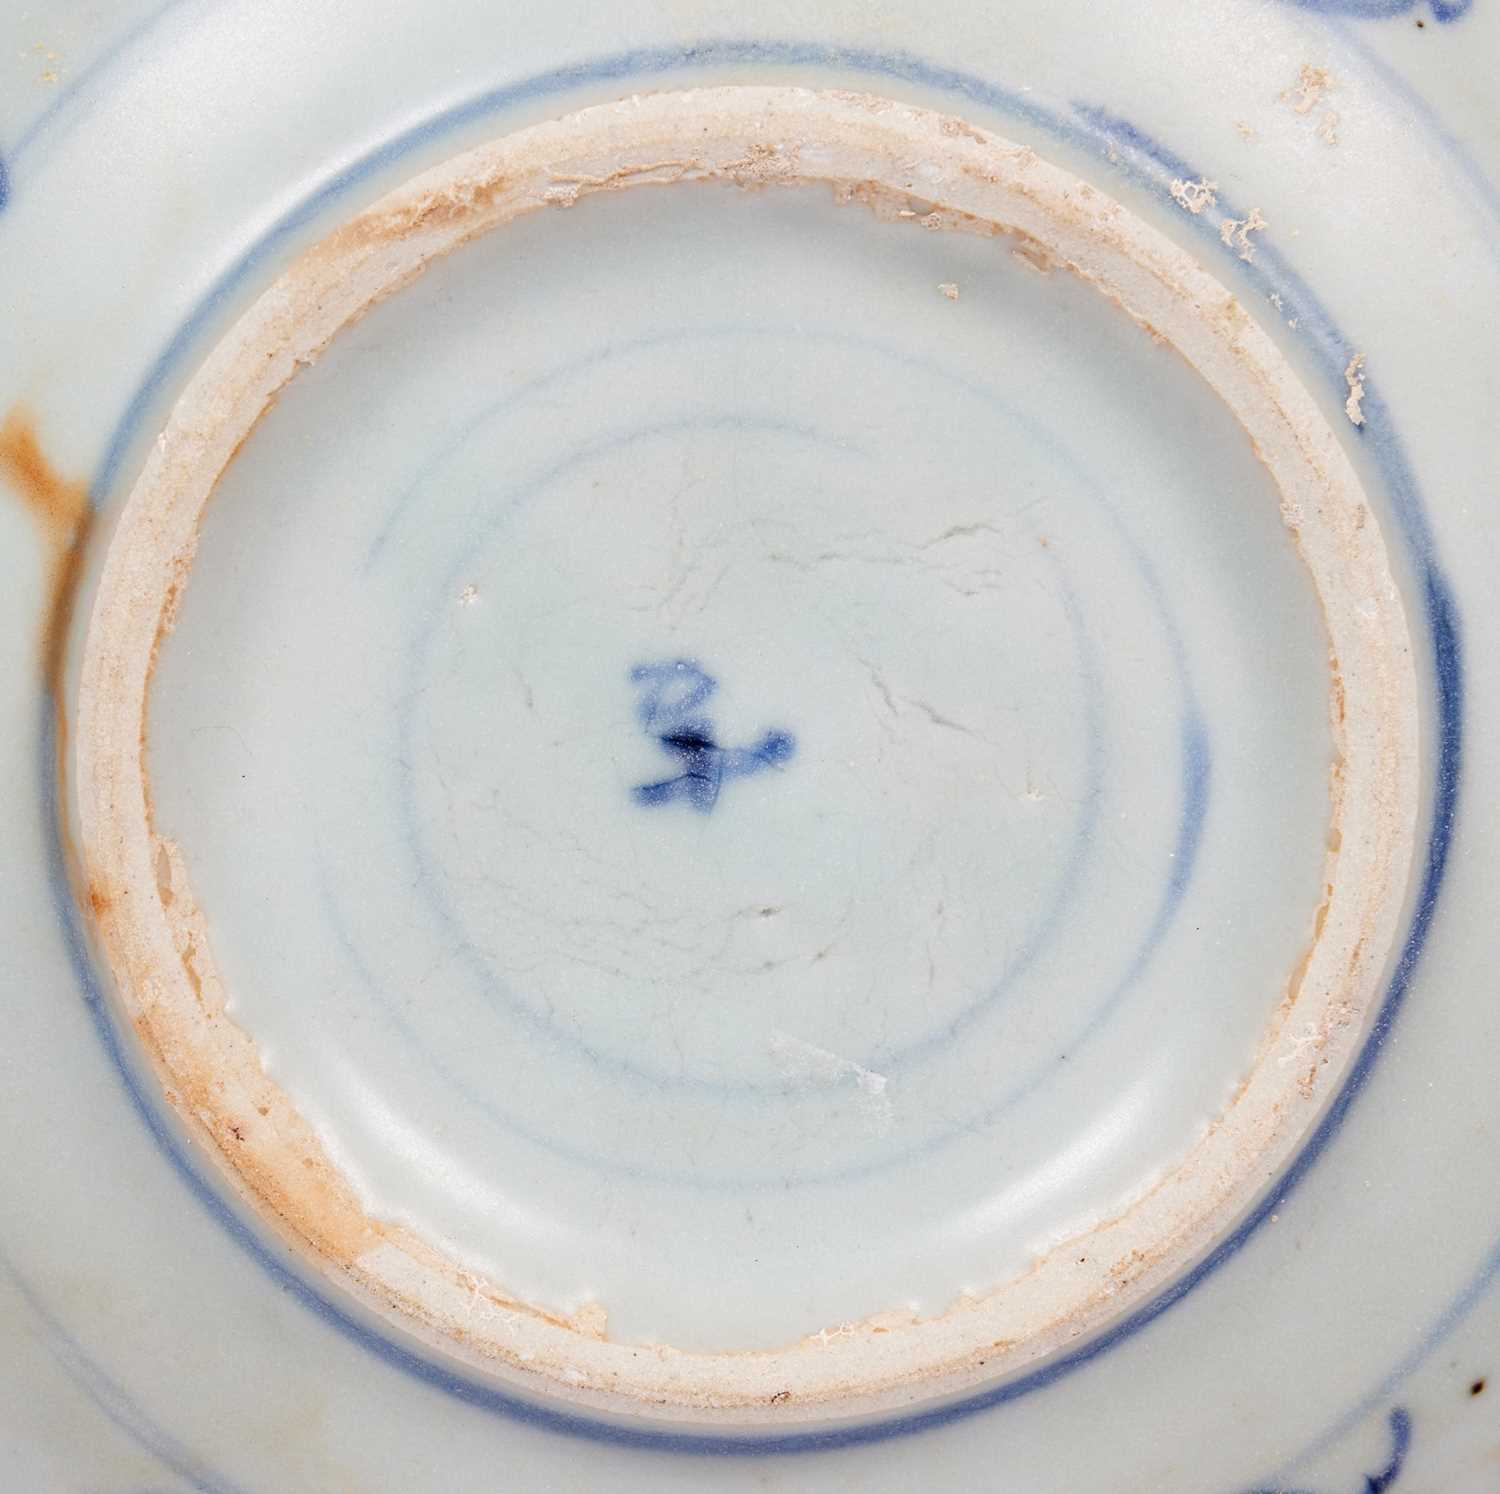 AN EARLY 19TH CENTURY CHINESE PORCELAIN PLATE RECOVERED FROM A SHIP WRECK - Image 2 of 2